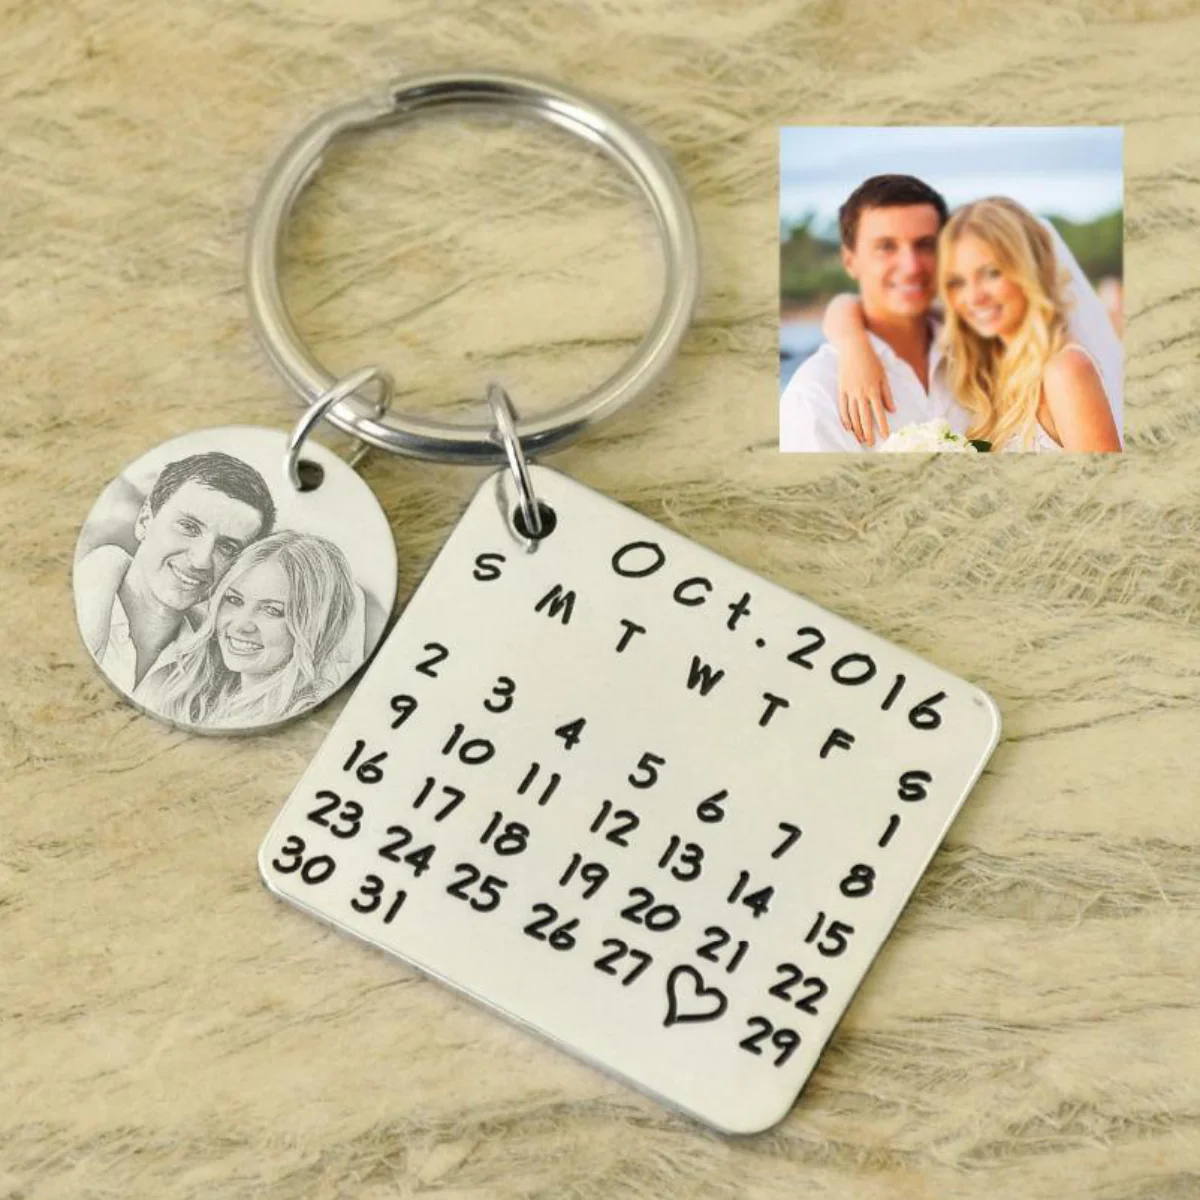 

Personalized Calendar Keychains Custom Photo Keychain Wedding Favors Keychains Valentine's Day Gift Save the Date Couple Keyring